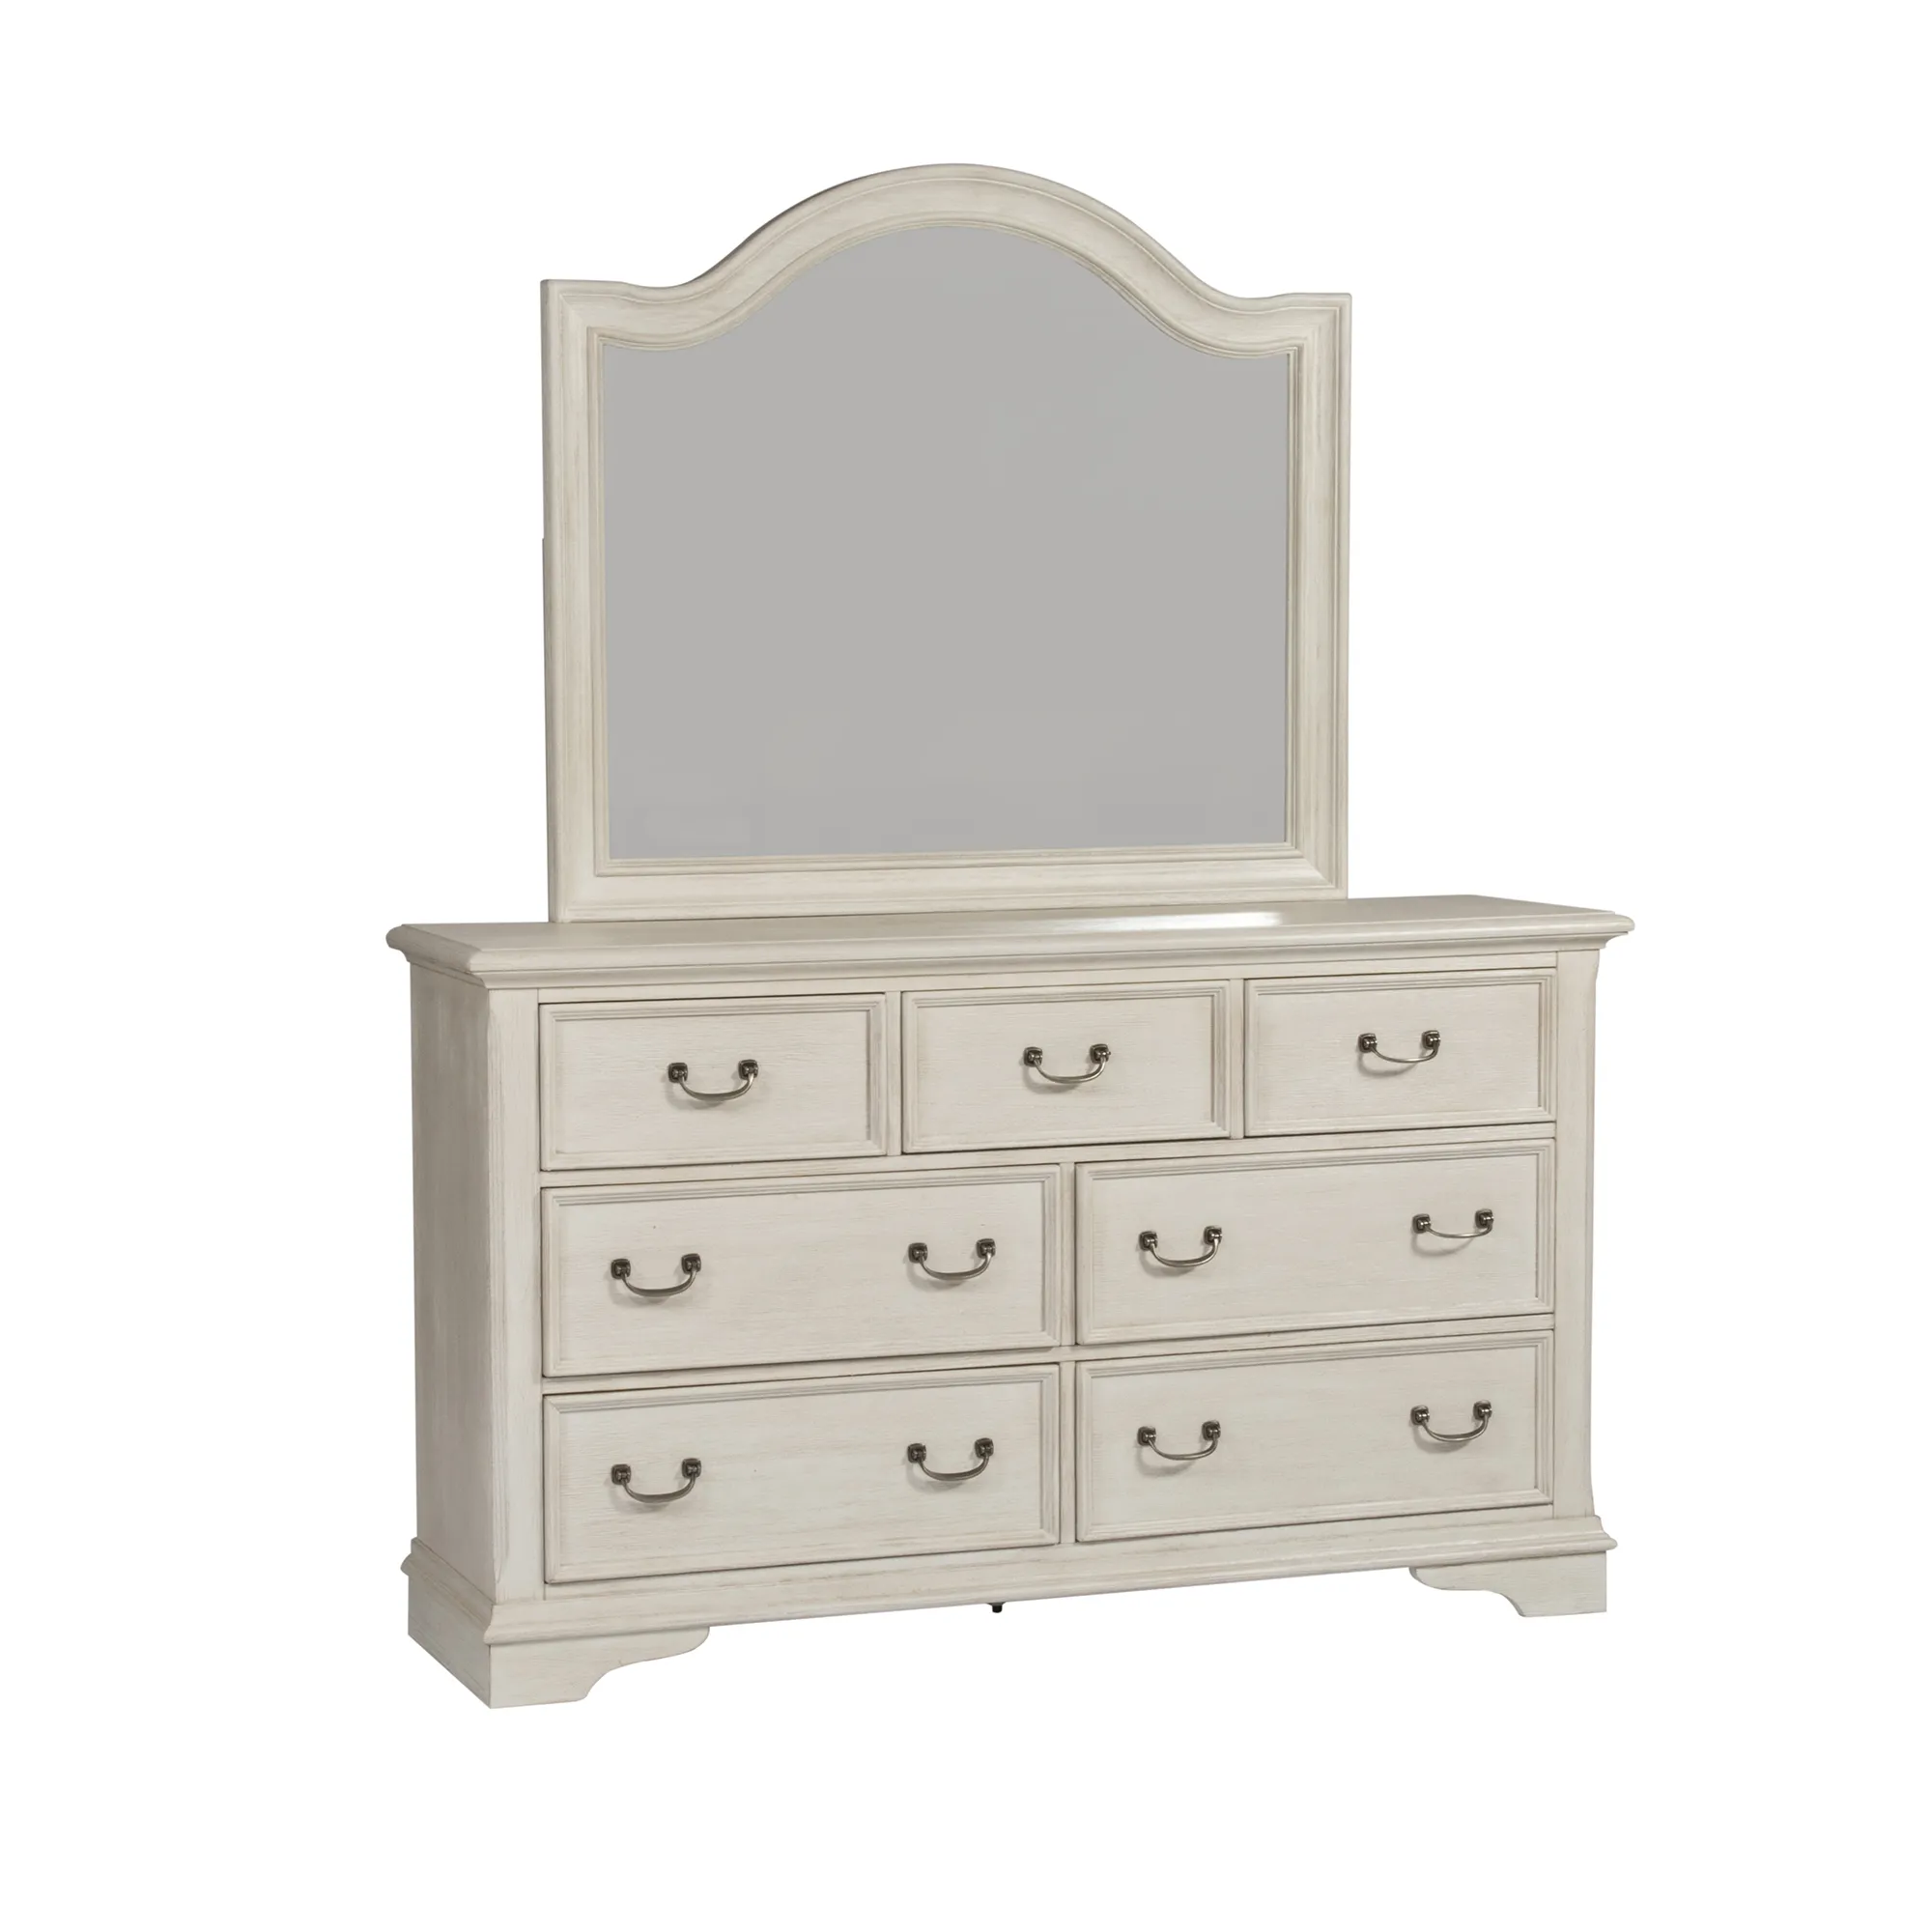 KING PANEL BED DRESSER & MIRROR CHEST NIGHT STAND - BAYSIDE